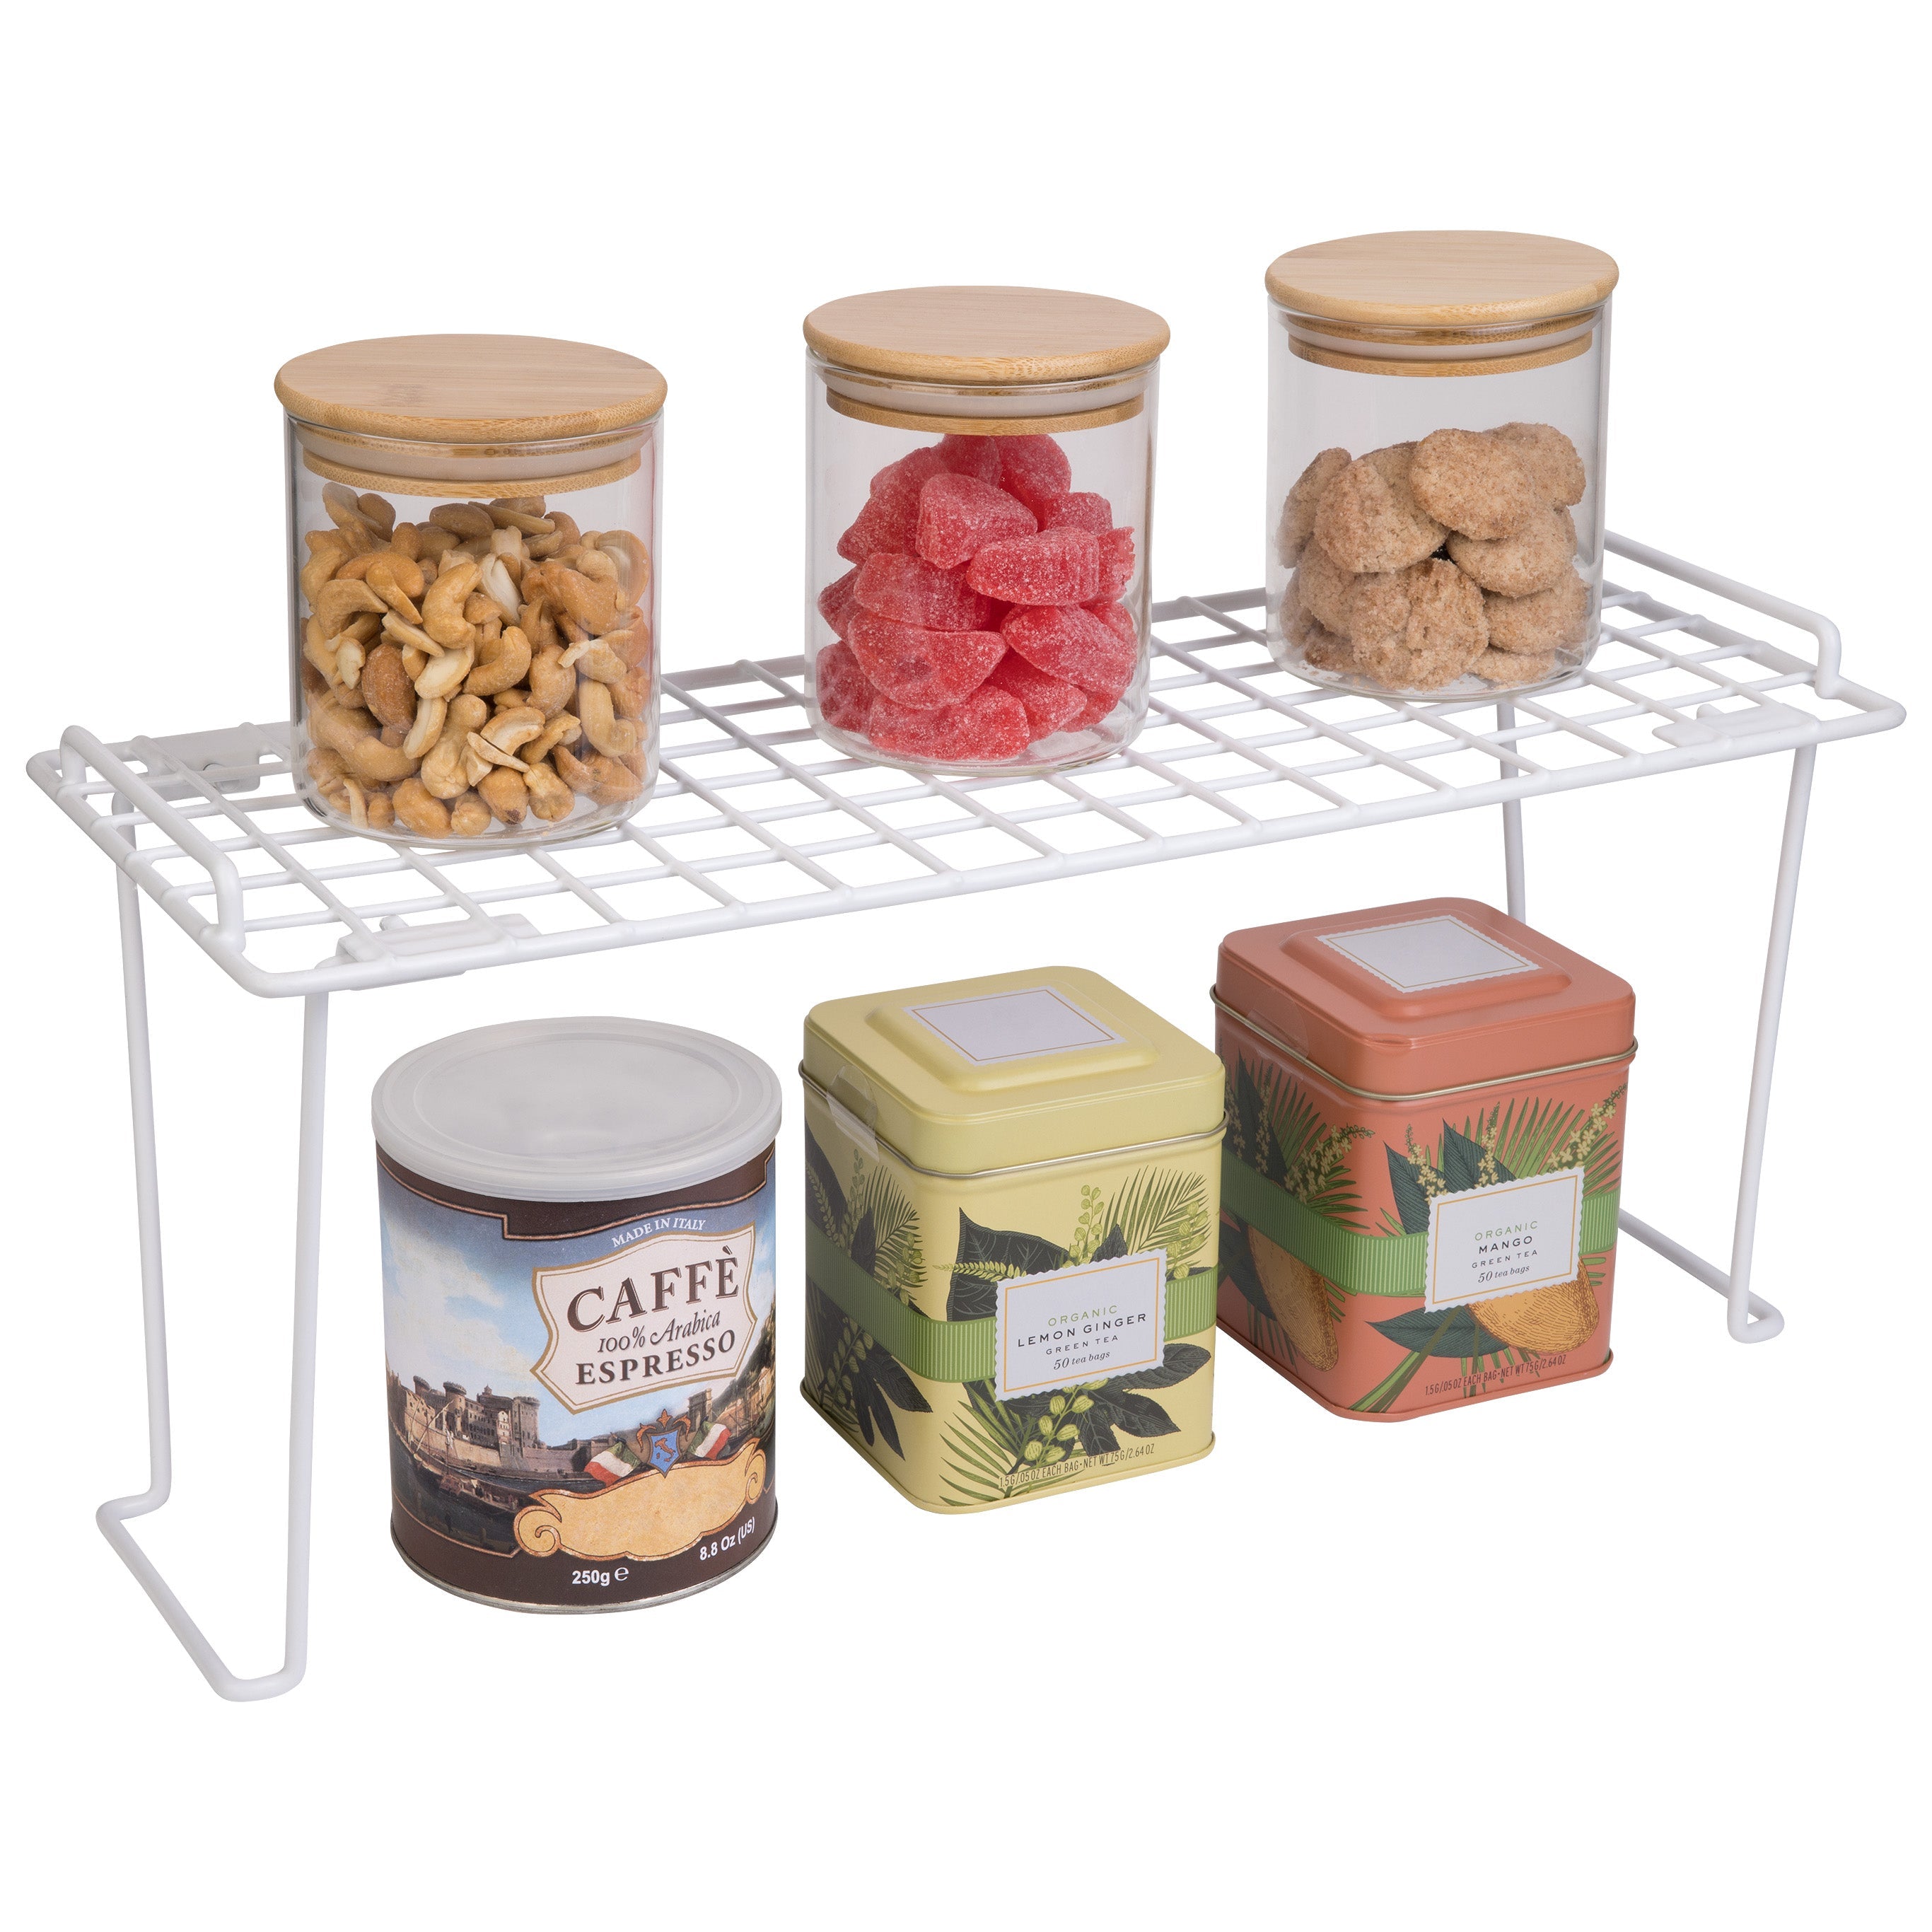 Small Stacking Cabinet Shelf Rack